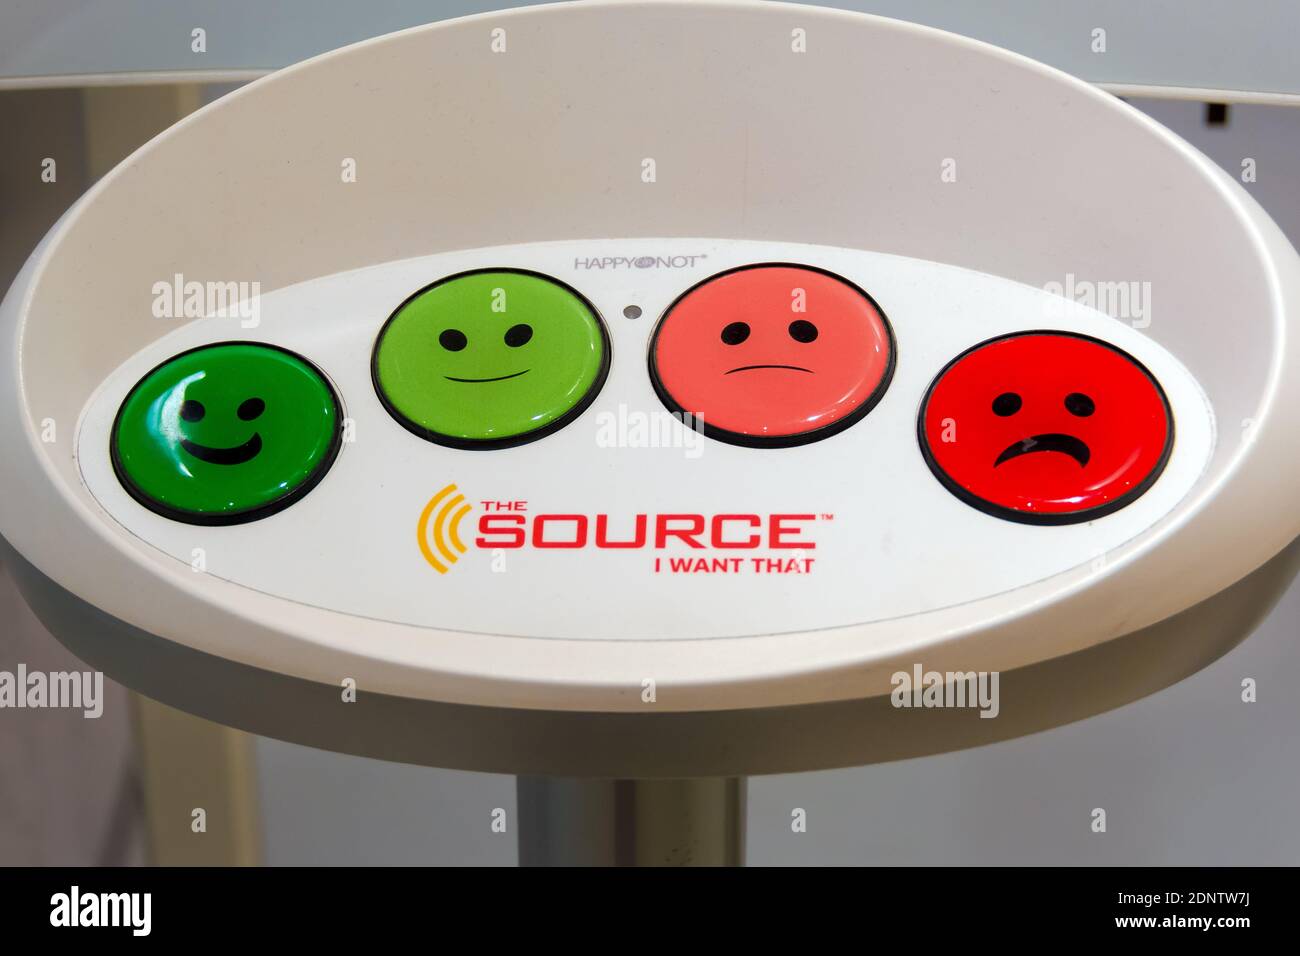 Customer satisfaction device at The Source store, Toronto, Canada Stock Photo